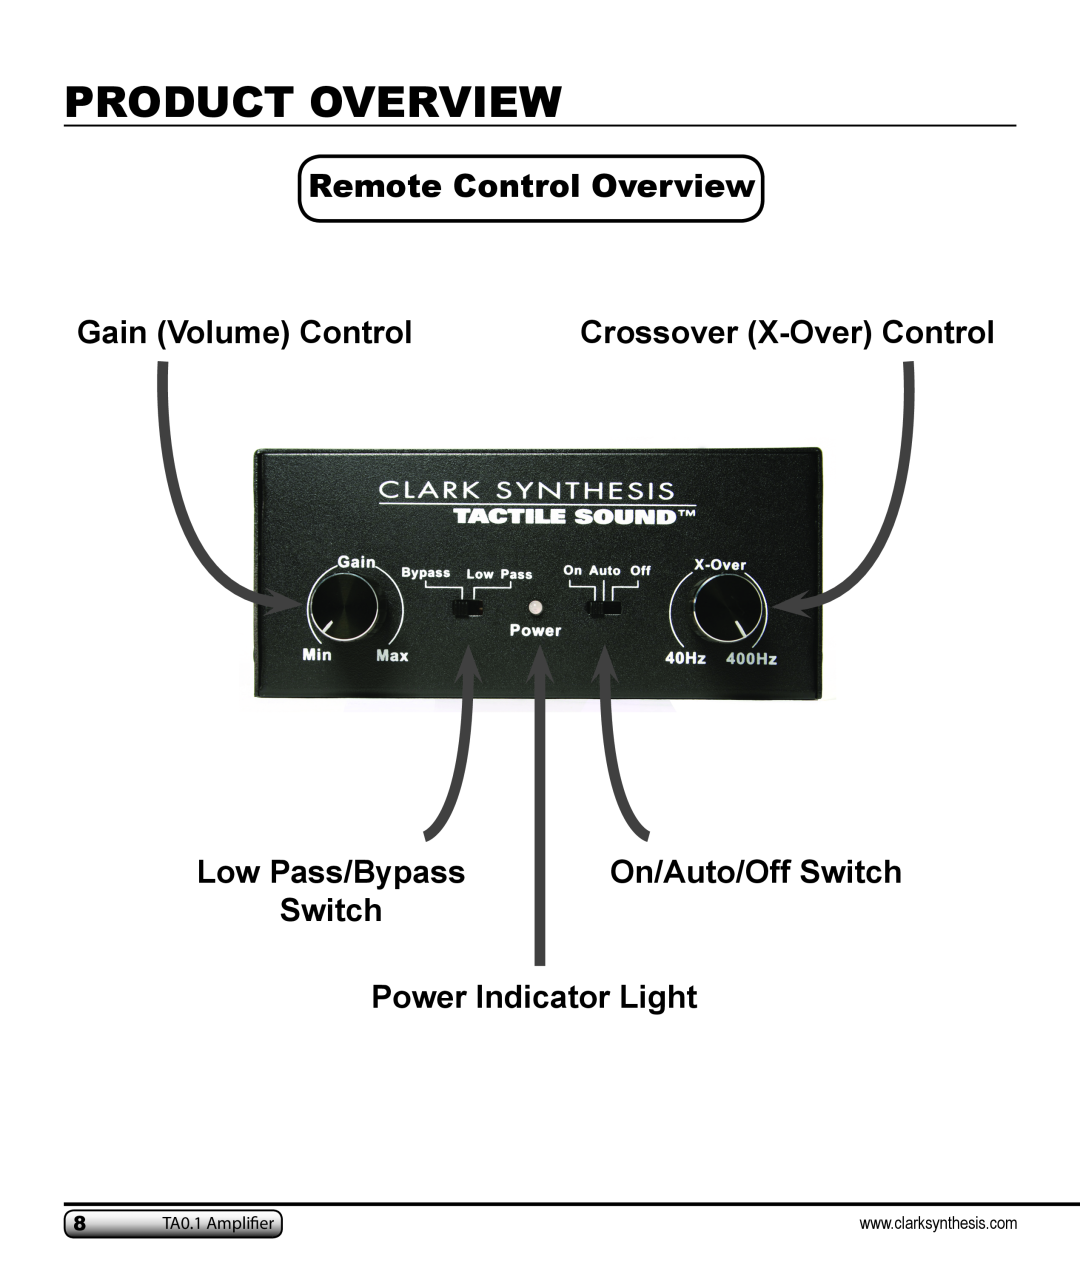 Clark Synthesis TA0.1 Remote Control Overview, Gain Volume Control, Crossover X-OverControl, Low Pass/Bypass Switch 